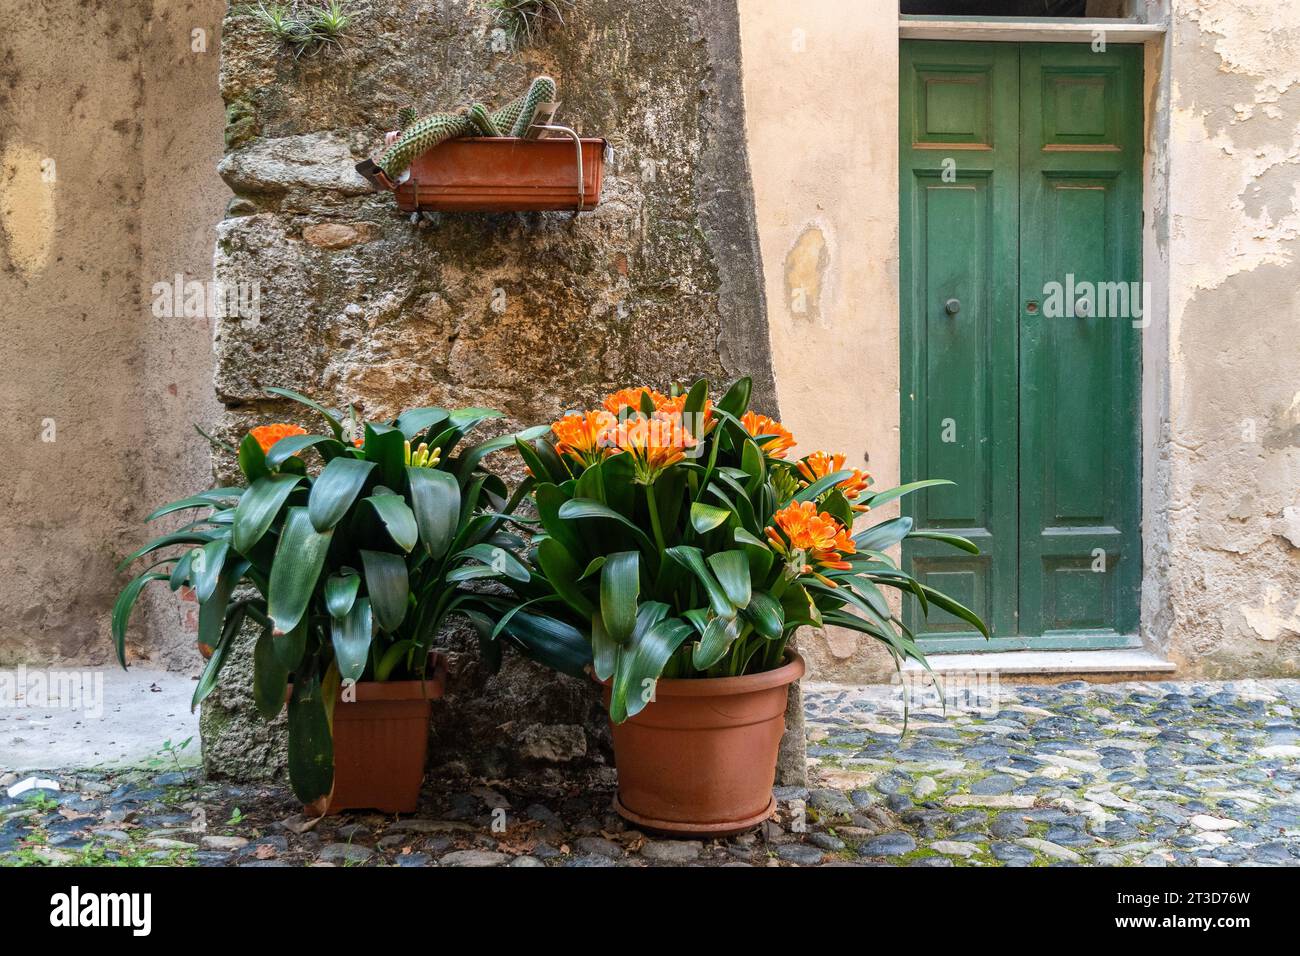 Potted clivia, common names Natal lily or bush lily, flowering plants from the family Amaryllidaceae, against a stone wall in a cobbled alley, Italy Stock Photo